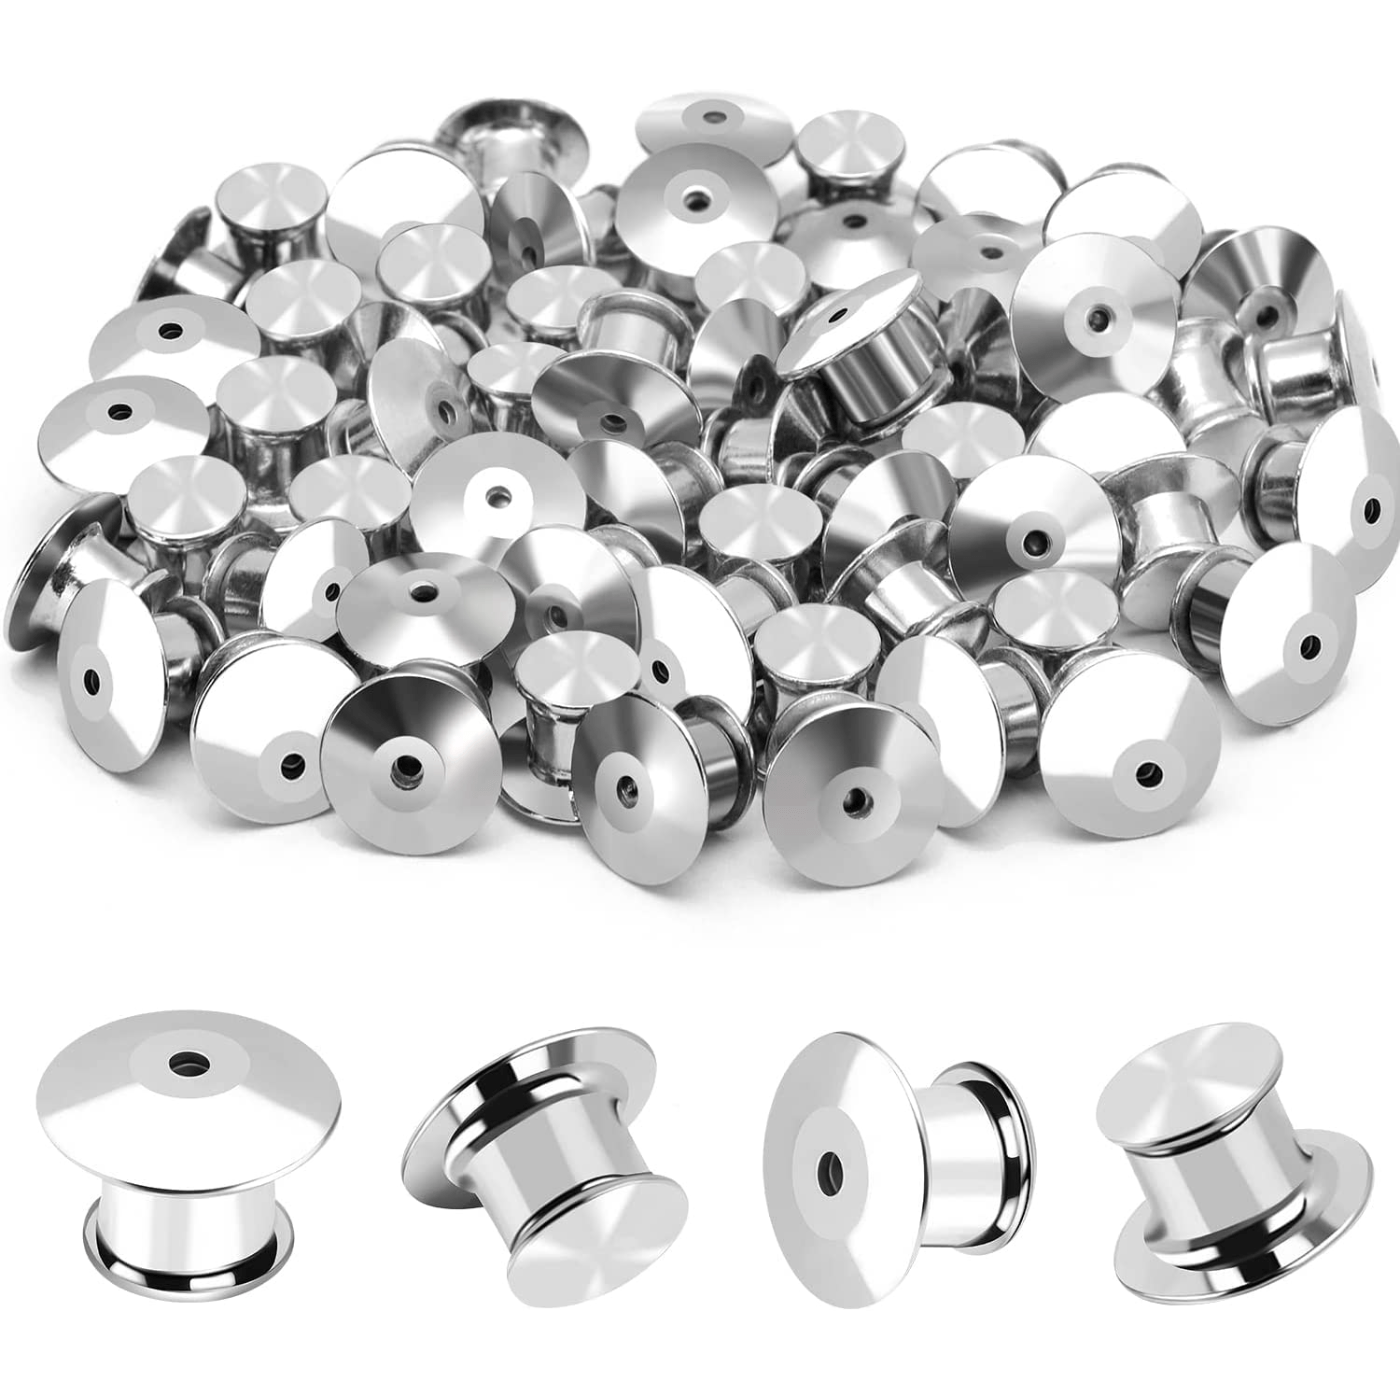  50PCS Metal Pin Backs, Pin Keepers Locking Clasp for Badge  Insignia Pin Backs Replacement (Silver)